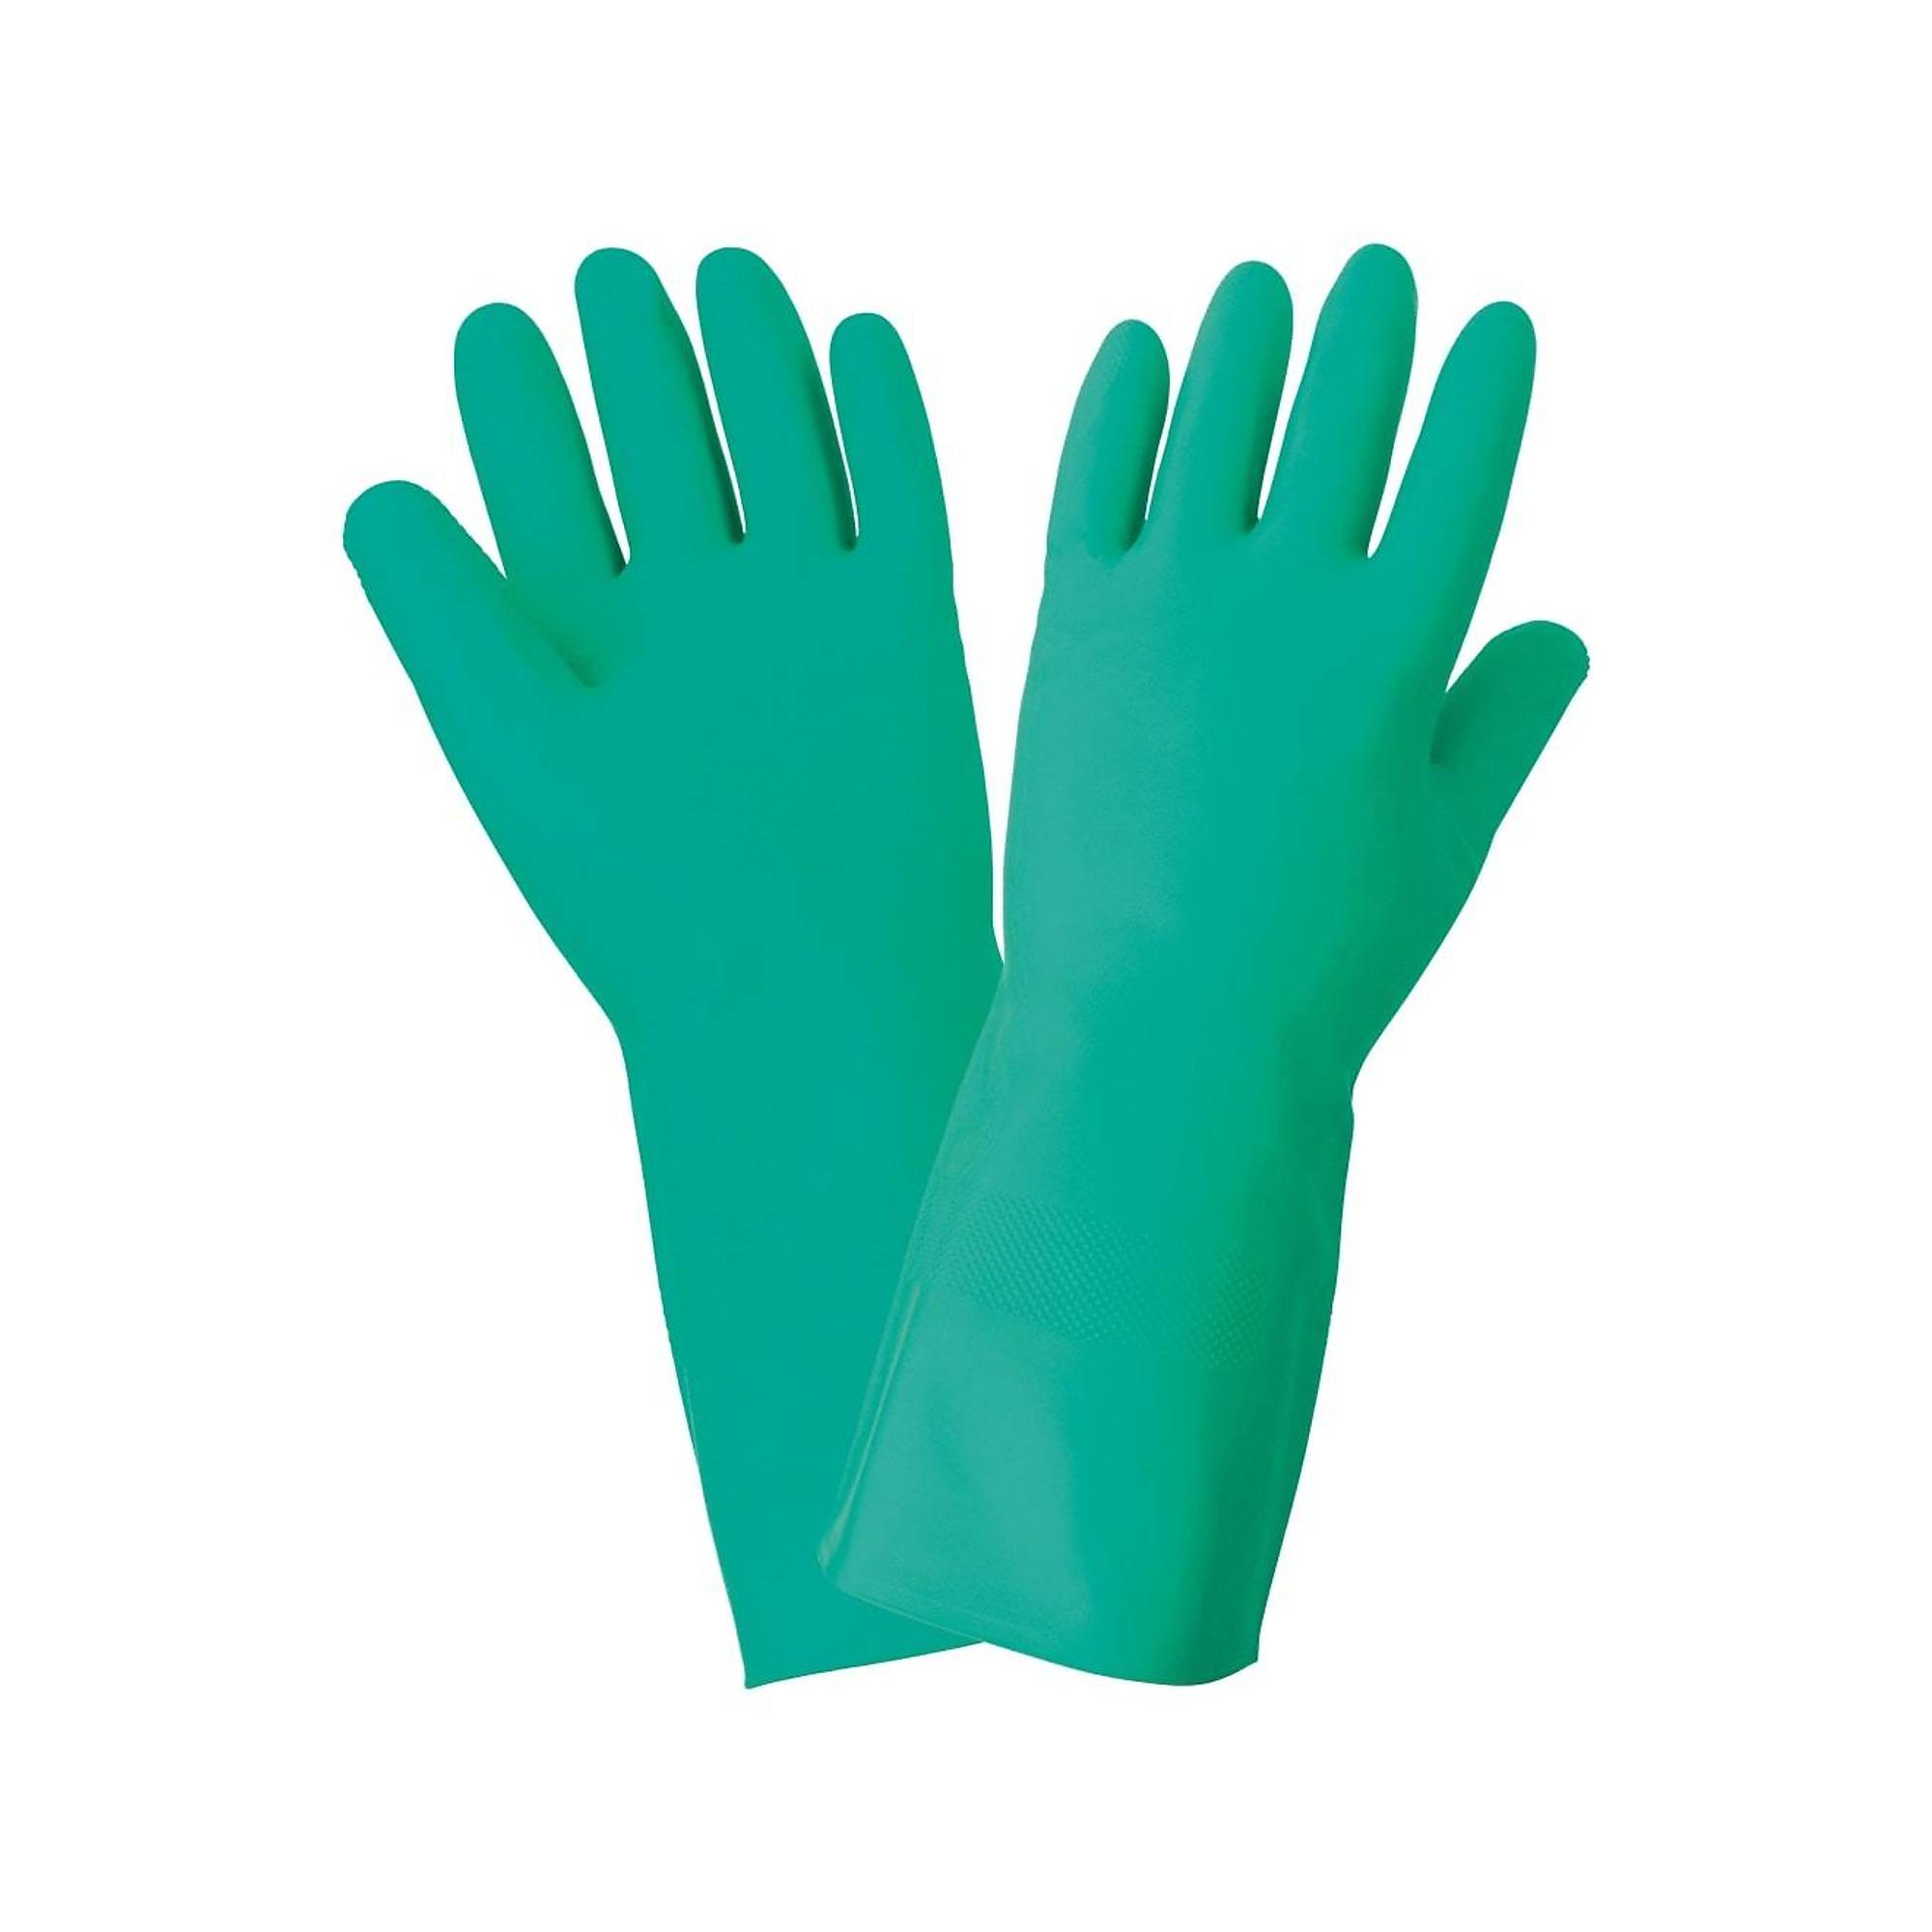 FrogWear, 12-Mil, 13Inch, Unlined, Nitrile Diamond Grip Gloves - 12 Pairs, Size 2XL, Color Green, Included (qty.) 12 Model 515-11(2XL)